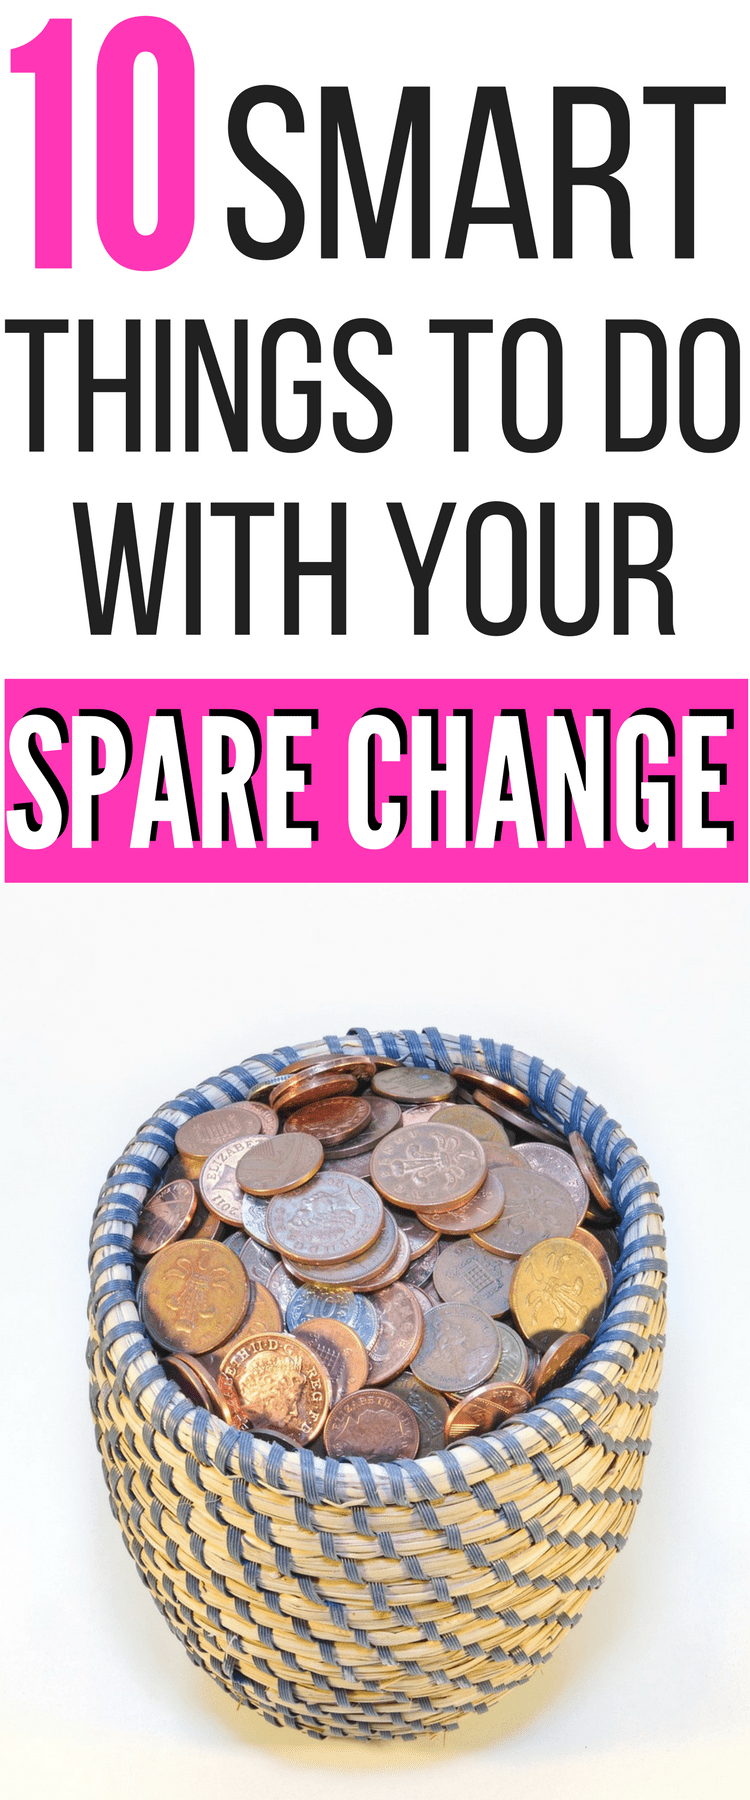 Do you have a spare change jar? Wondering what you should do with all that change you're saving up? Here are 10 smart things to do with your spare change.